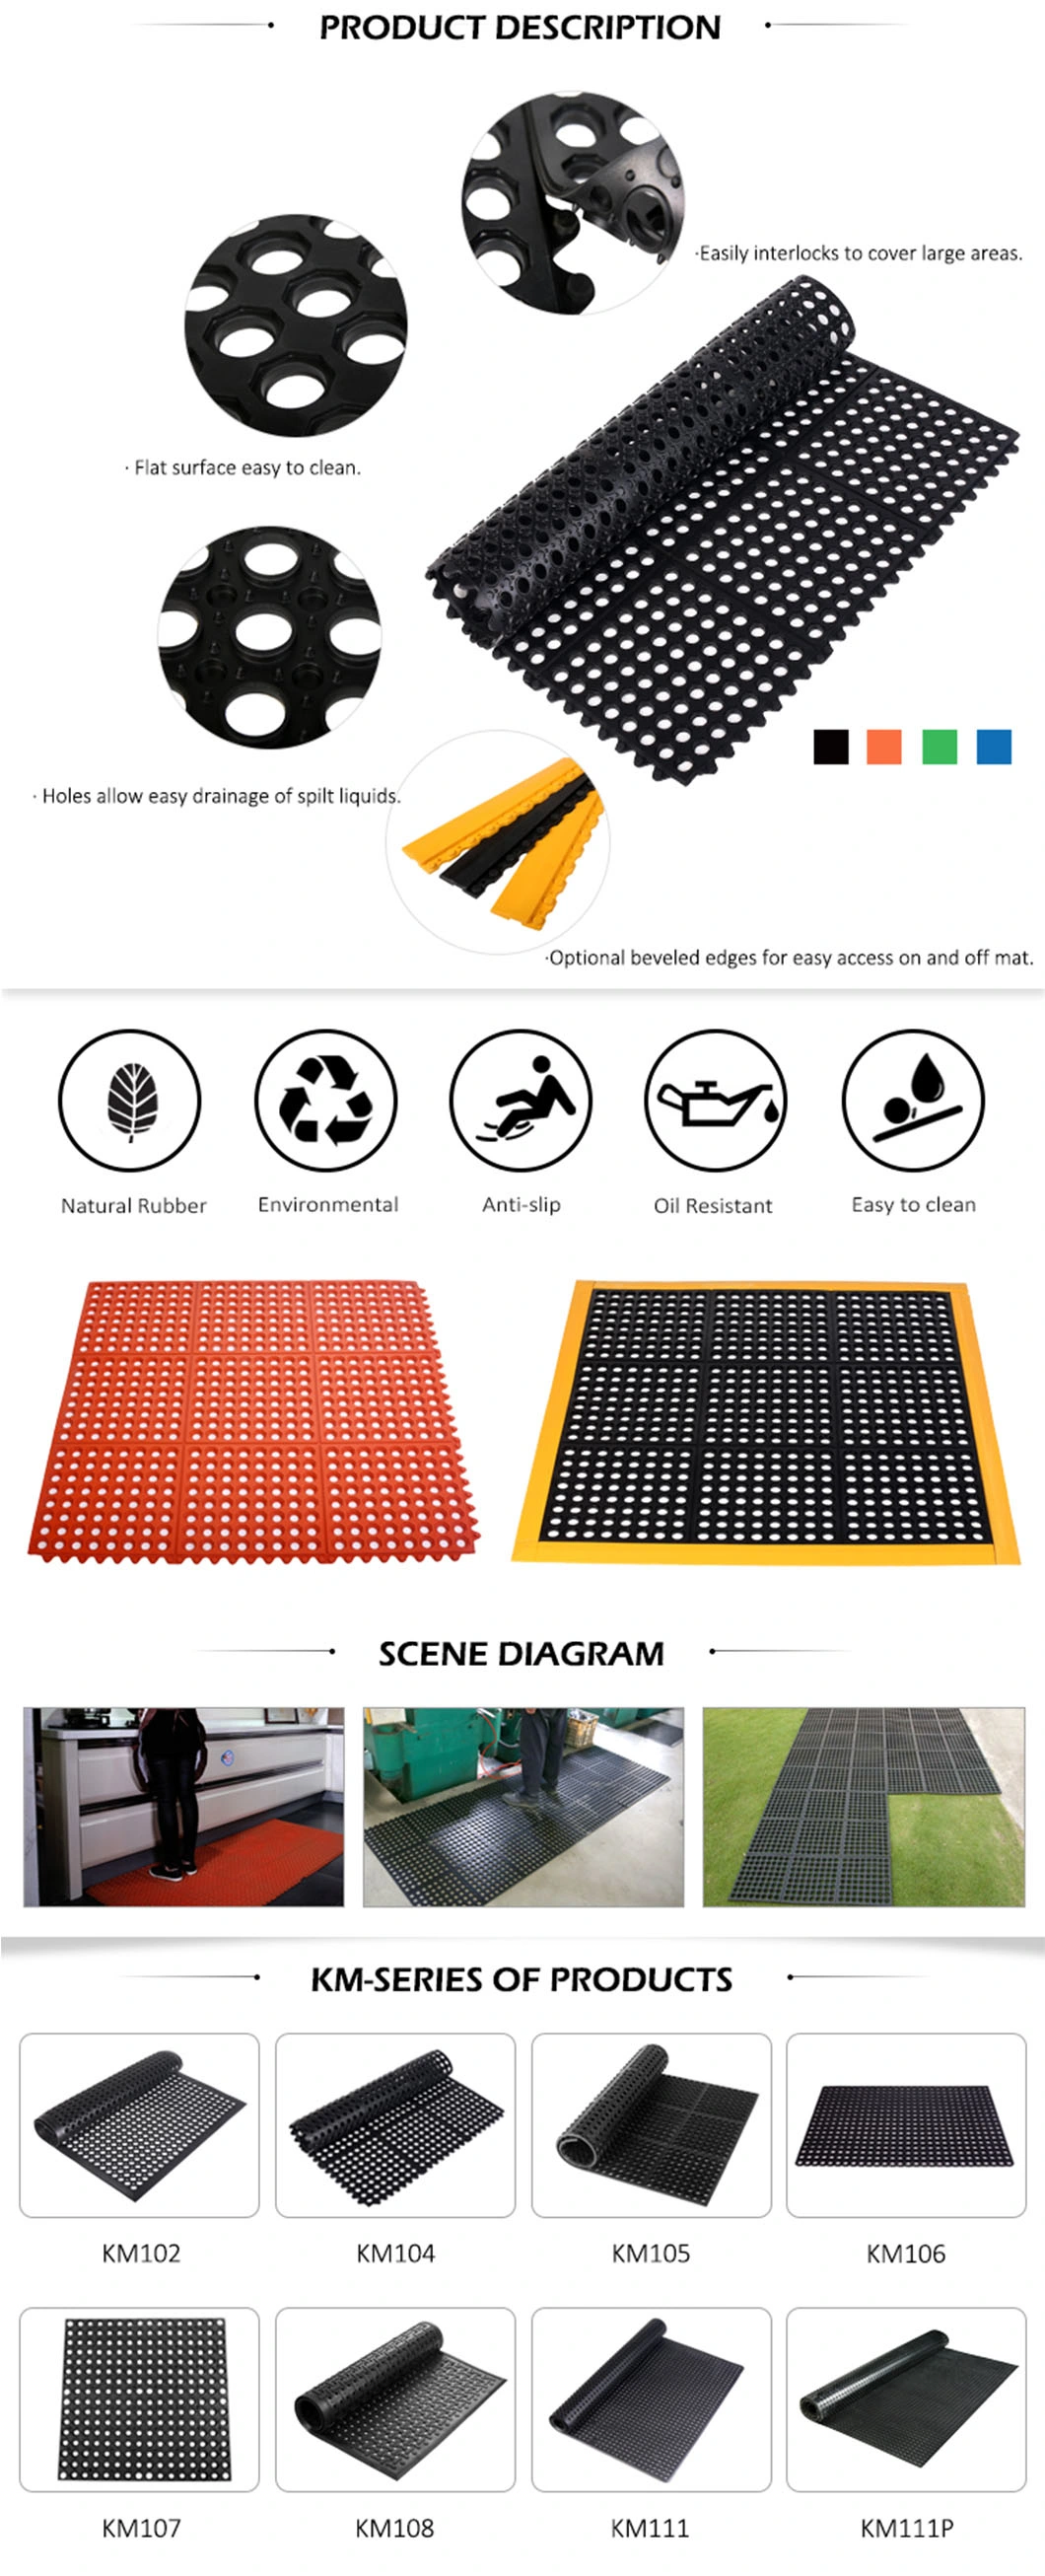 Wholesale Price Interlocking Anti Slip Anti Fatigue Perforated Holes Drainage Rubber Ring Mat with 3FT*3FT